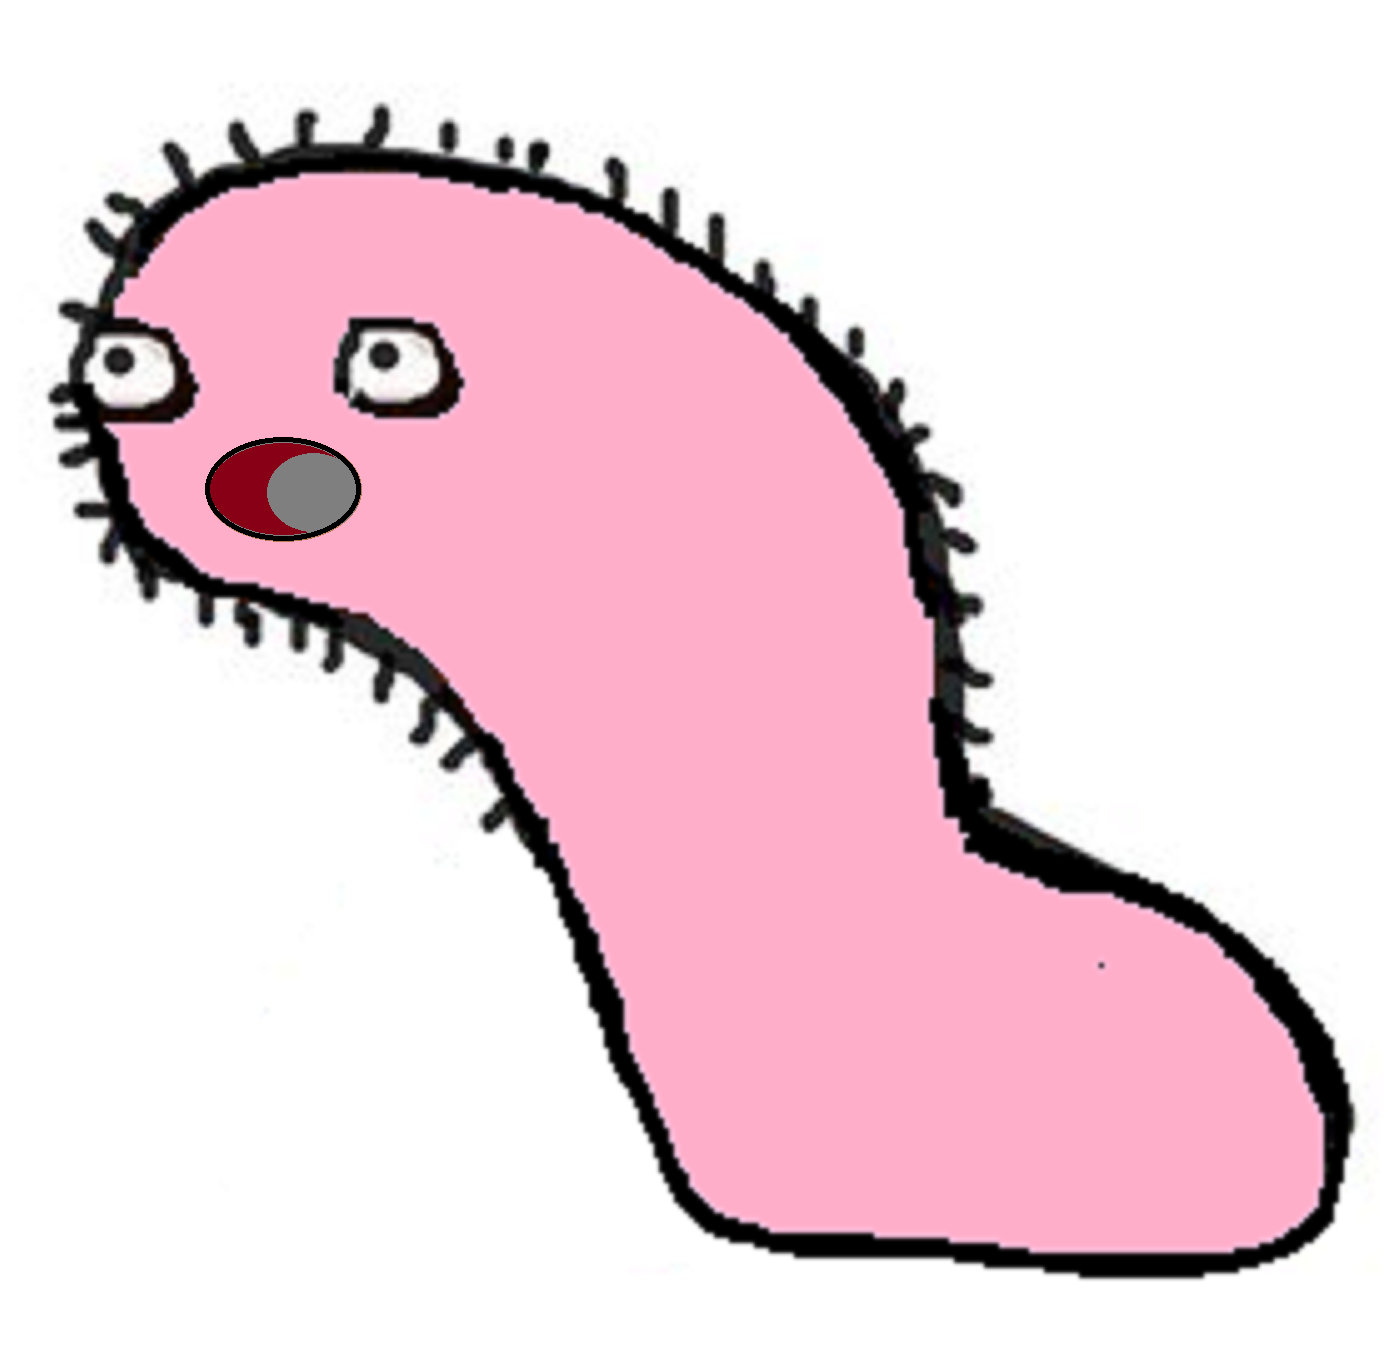 TFWorms